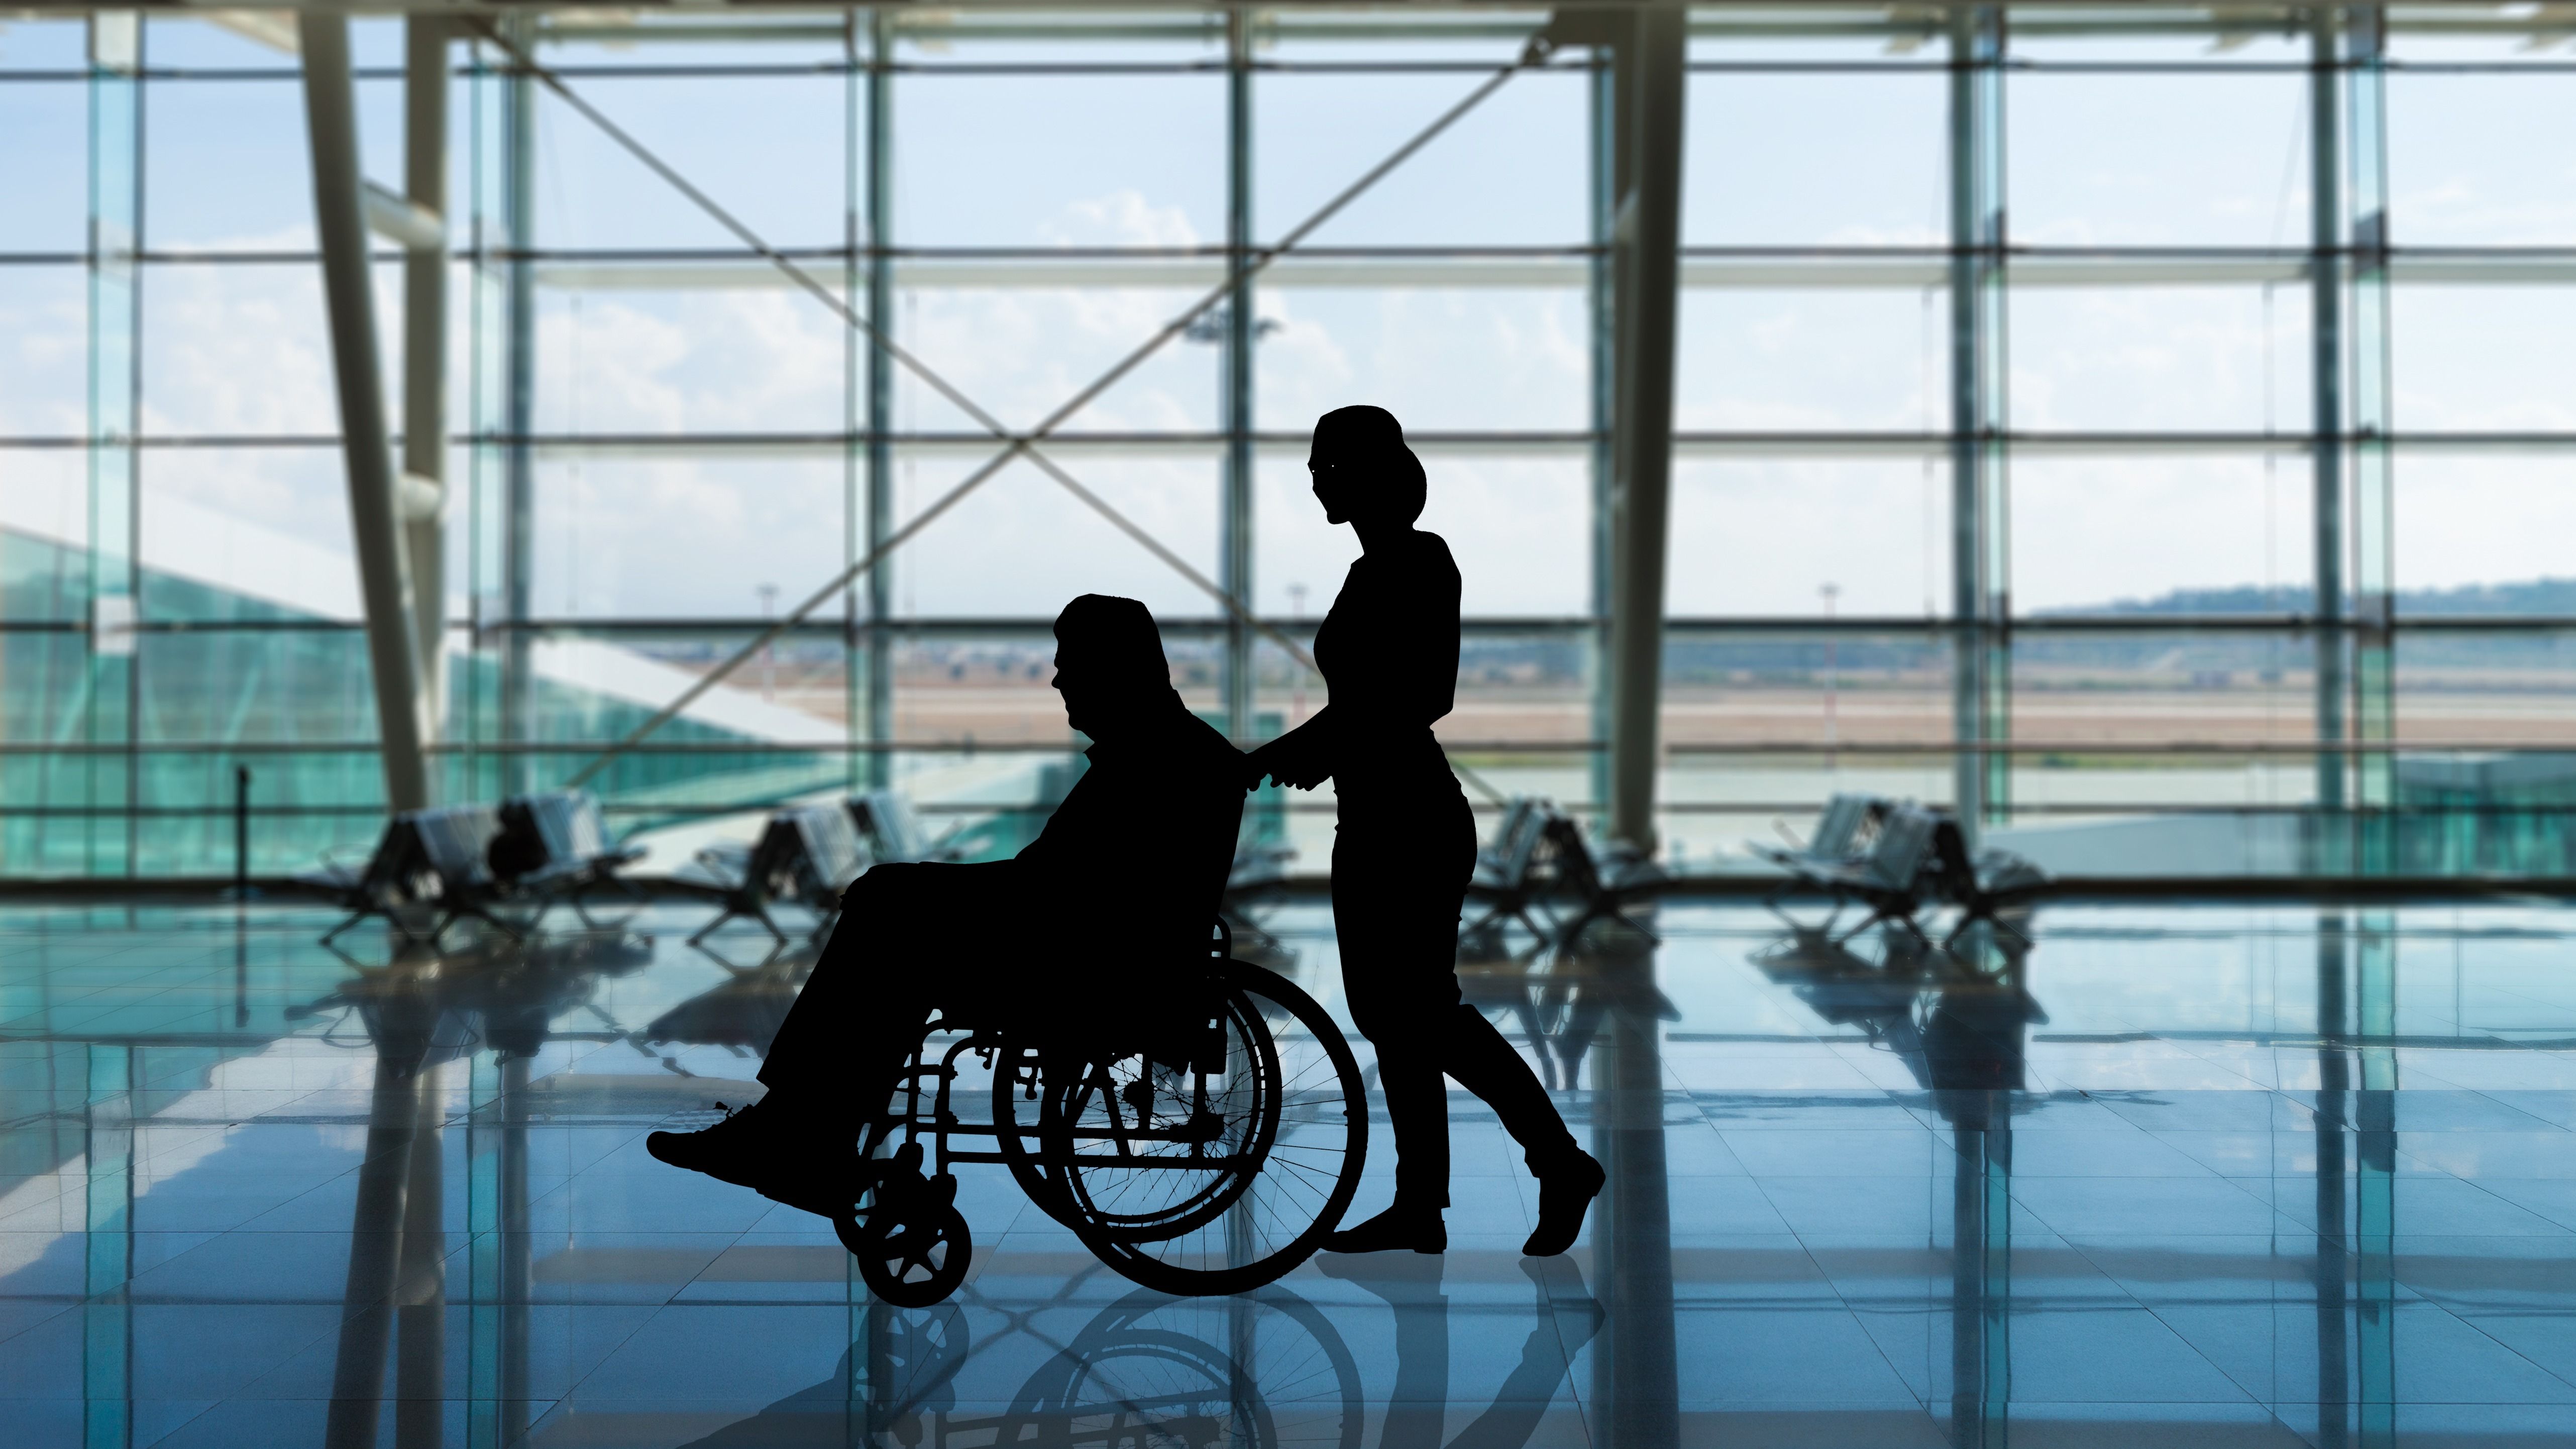 Passenger in a wheelchair at an airport